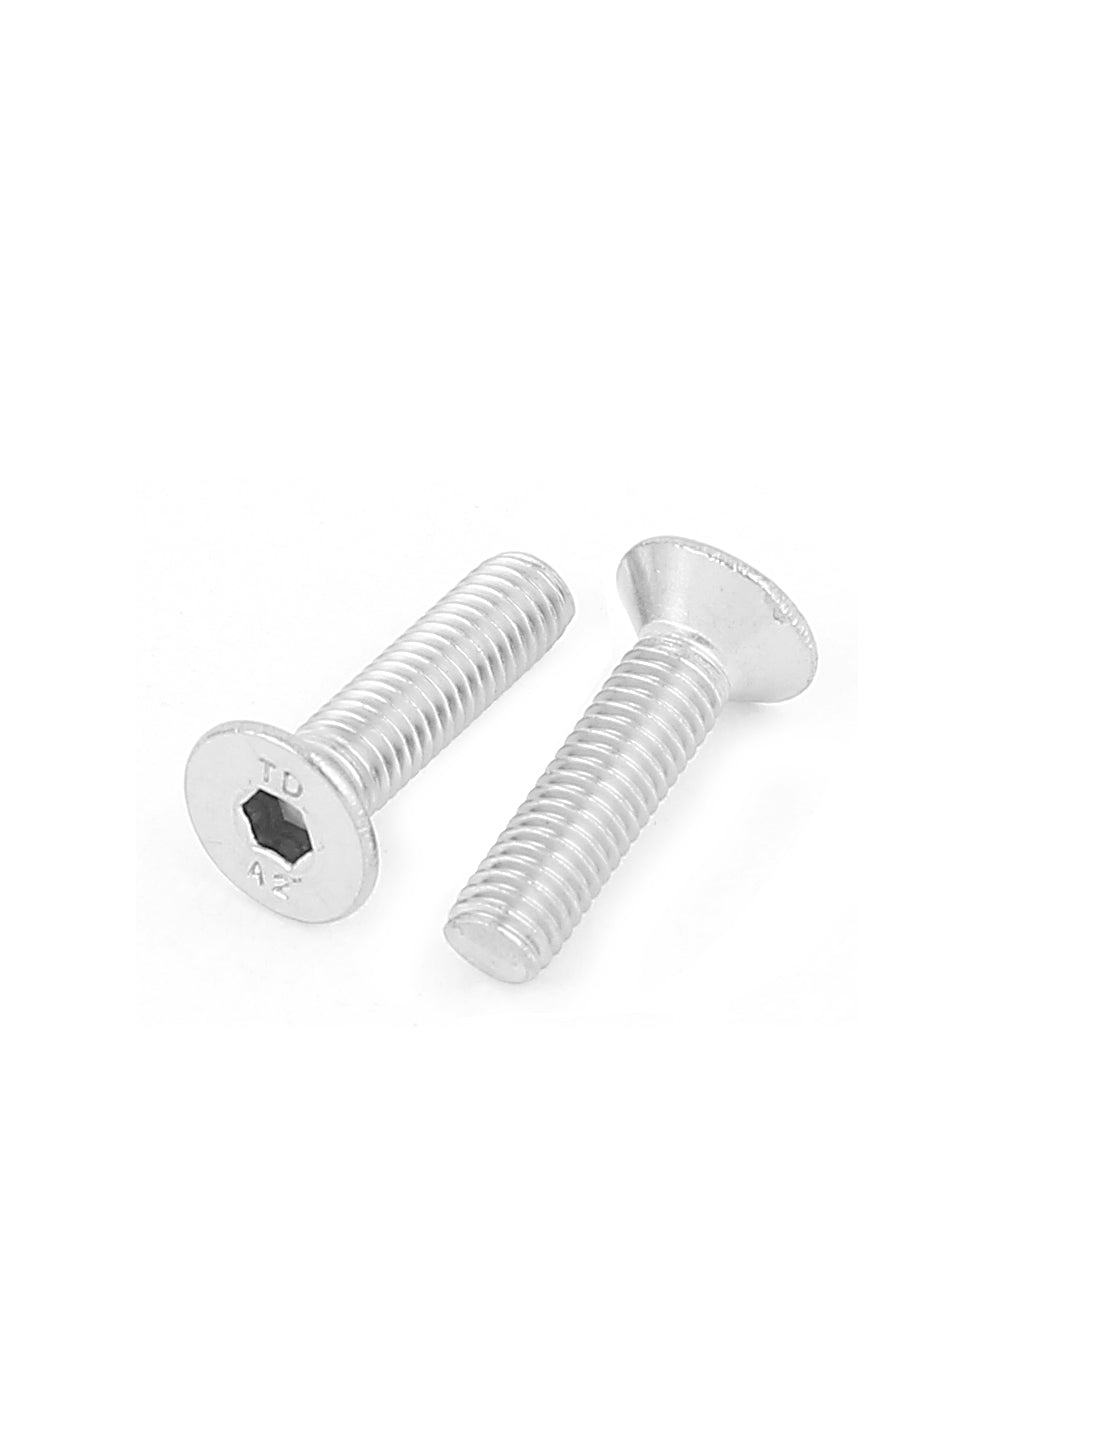 uxcell Uxcell M5x20mm Stainless Steel Hex Socket Flat Head Countersunk Bolts Screw 50Pcs